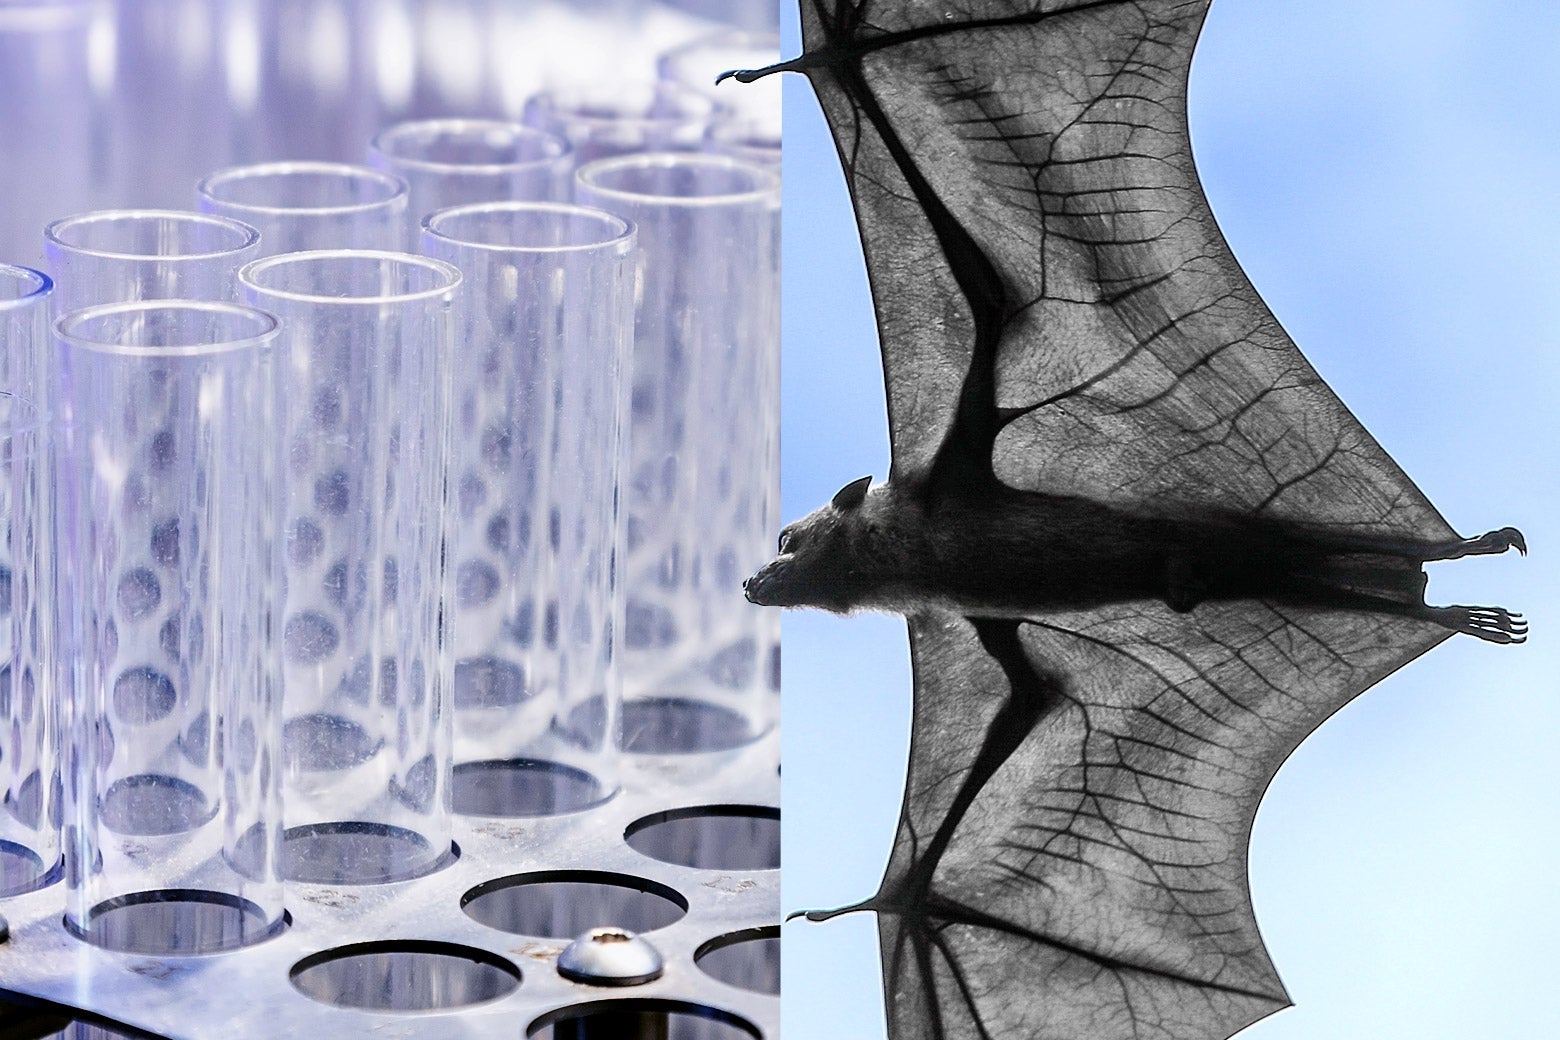 A side-by-side of test tubes and a bat